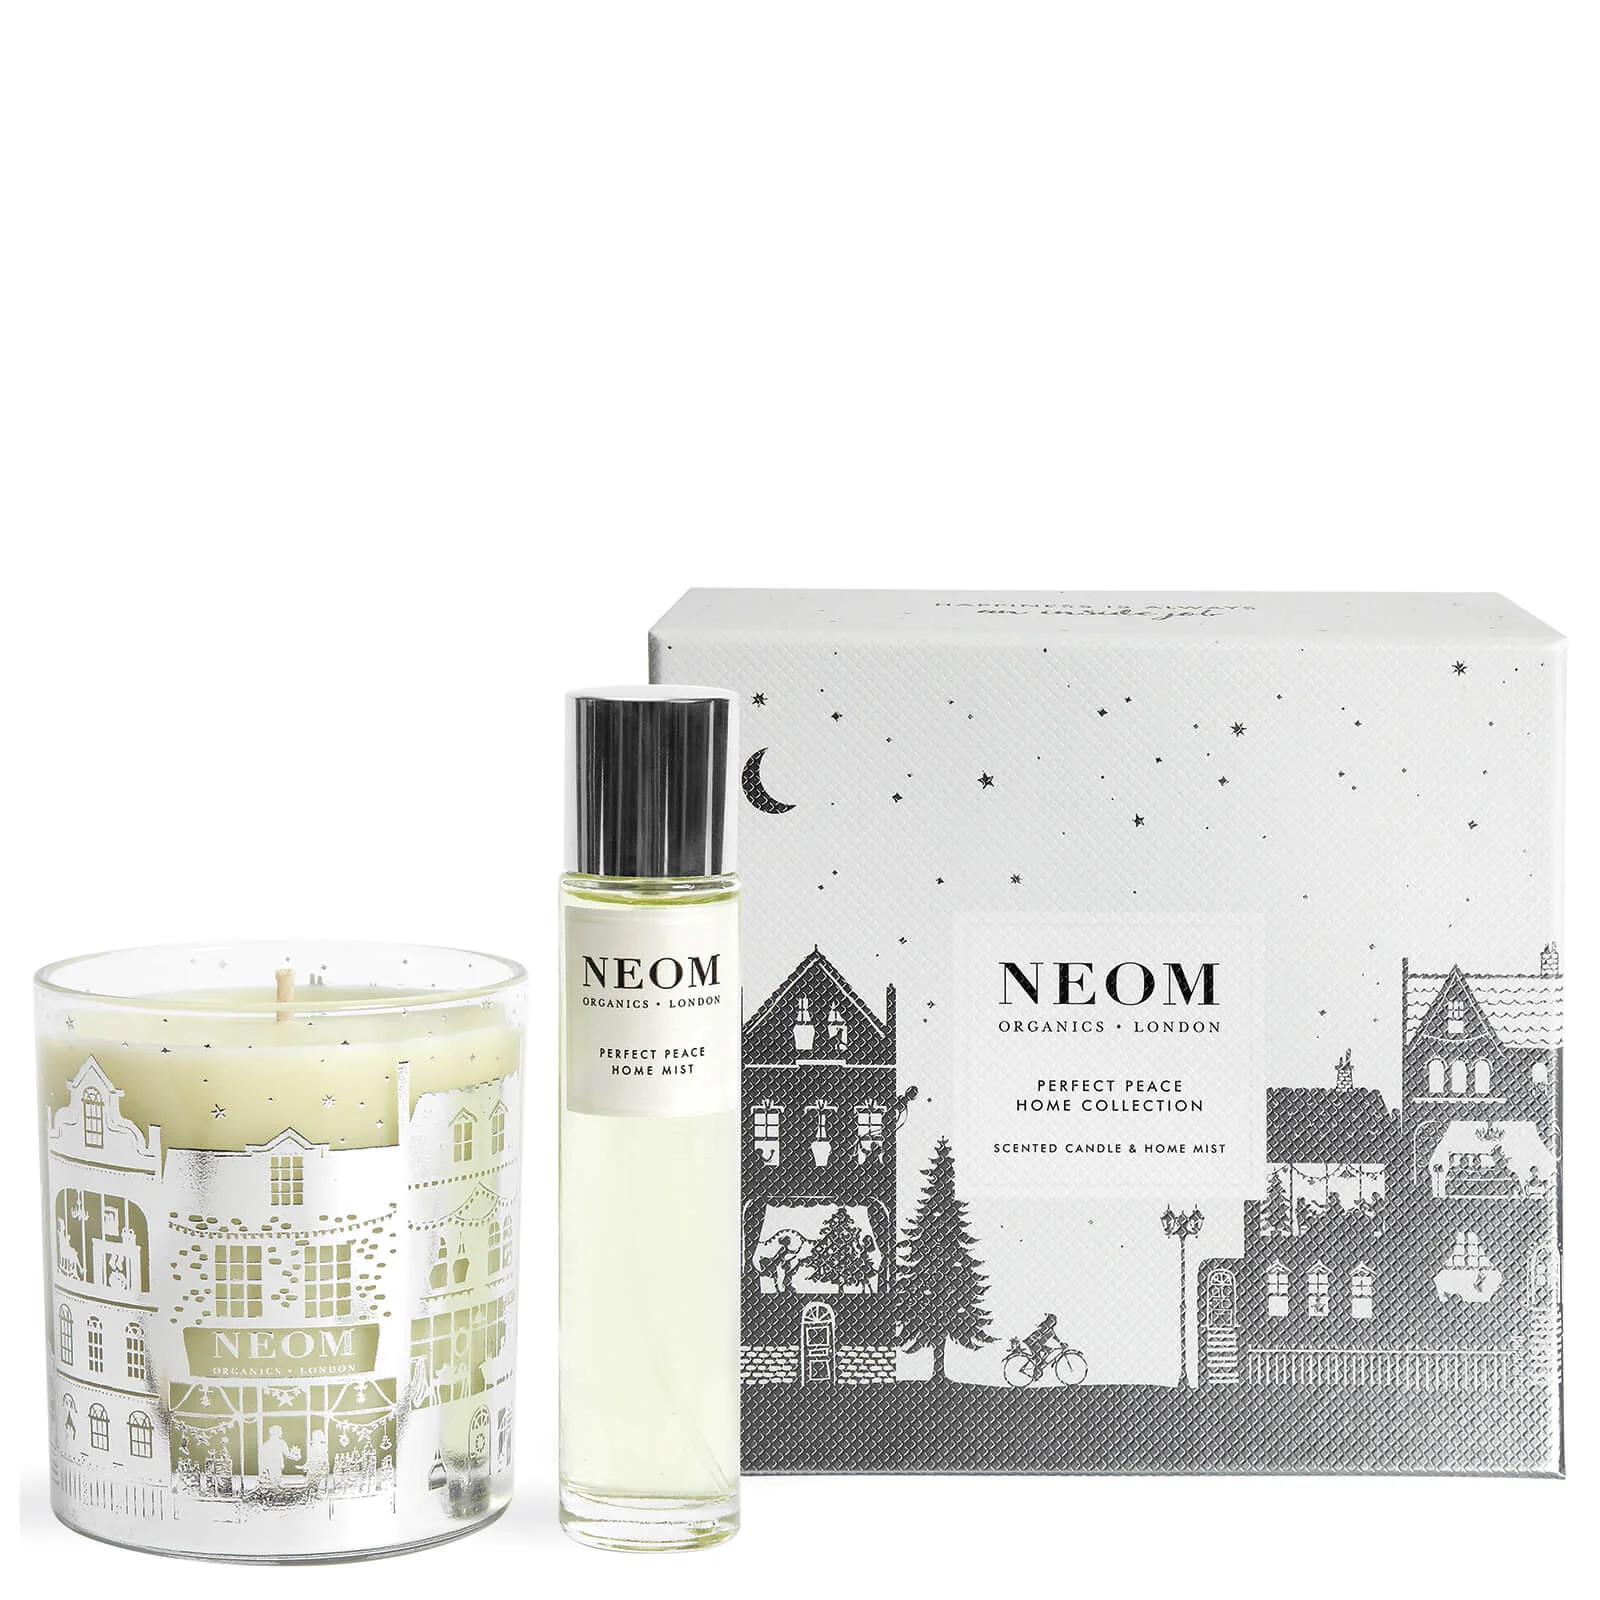 Neom Organics London Perfect Peace Home Collection Image 1